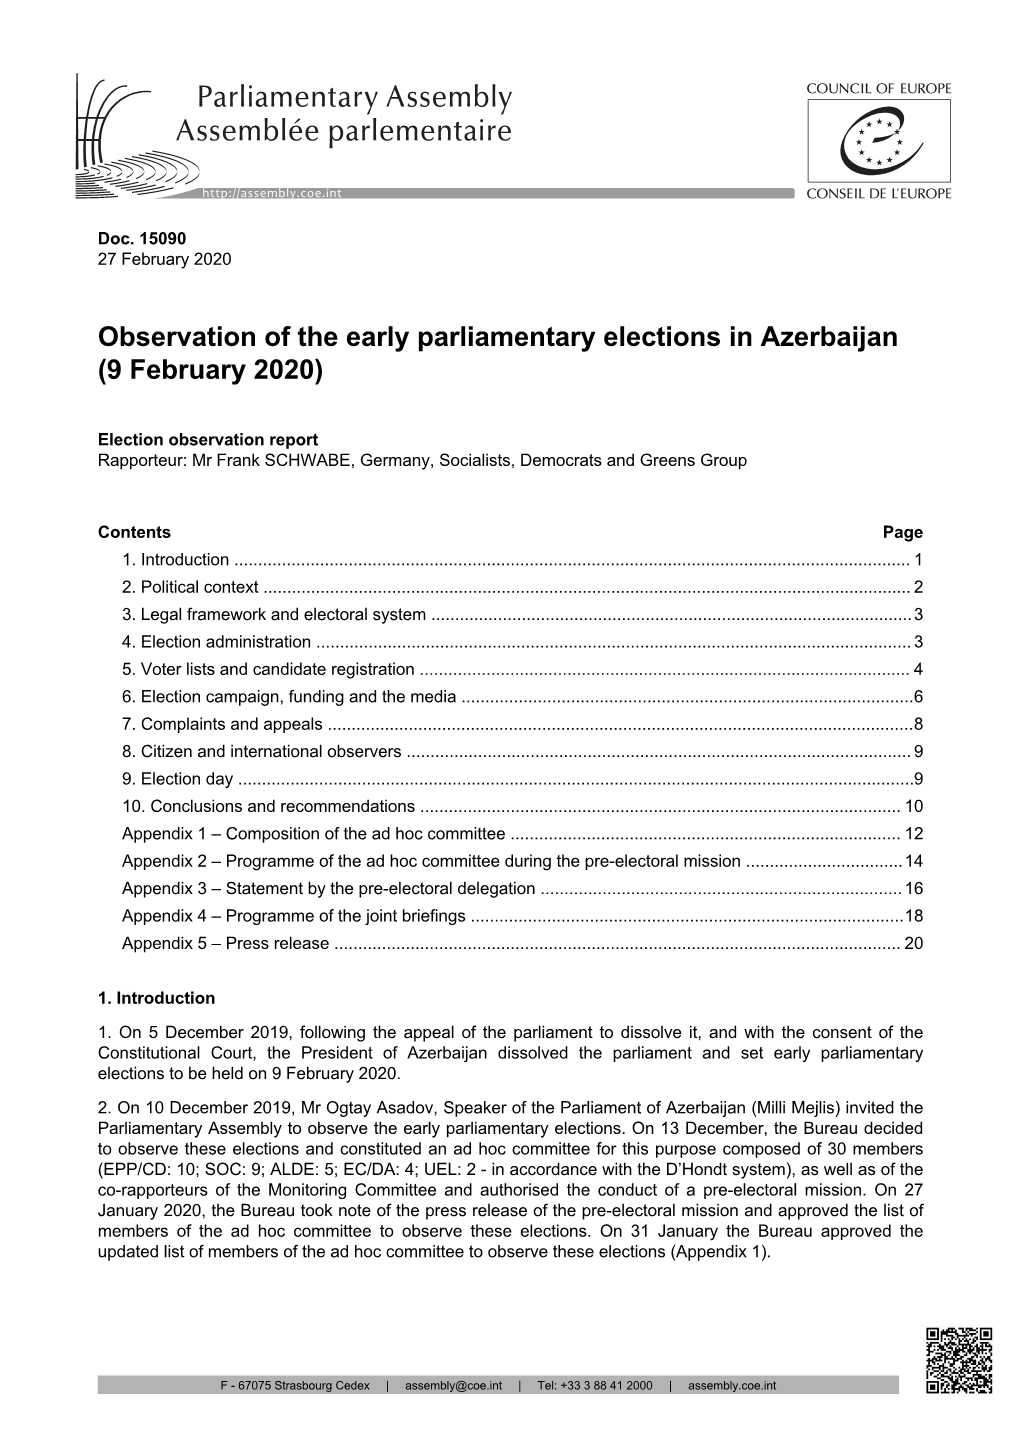 Observation of the Early Parliamentary Elections in Azerbaijan (9 February 2020)